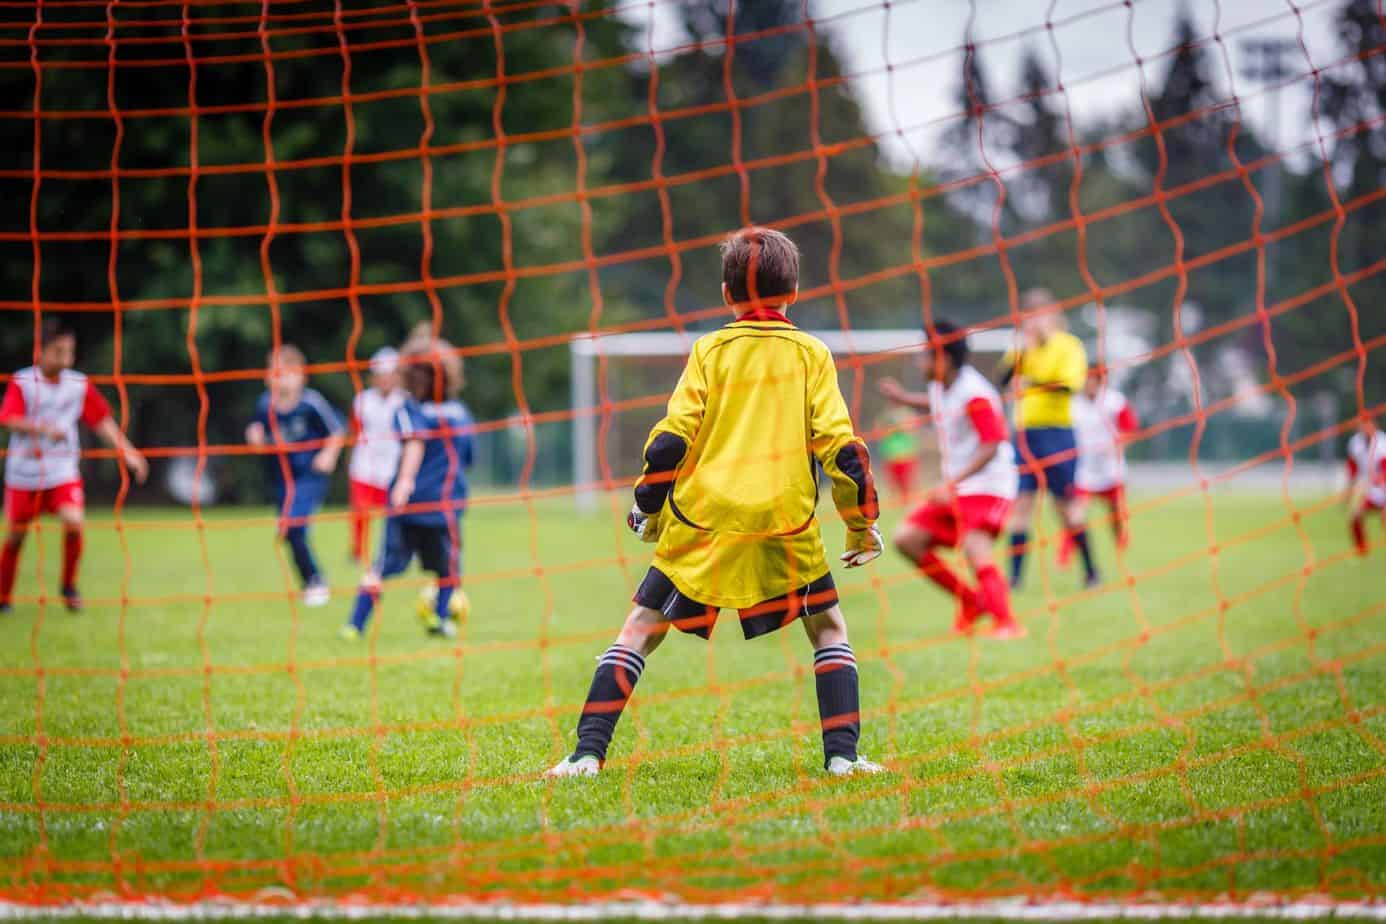 Young soccer goalie defending the net in the rain.